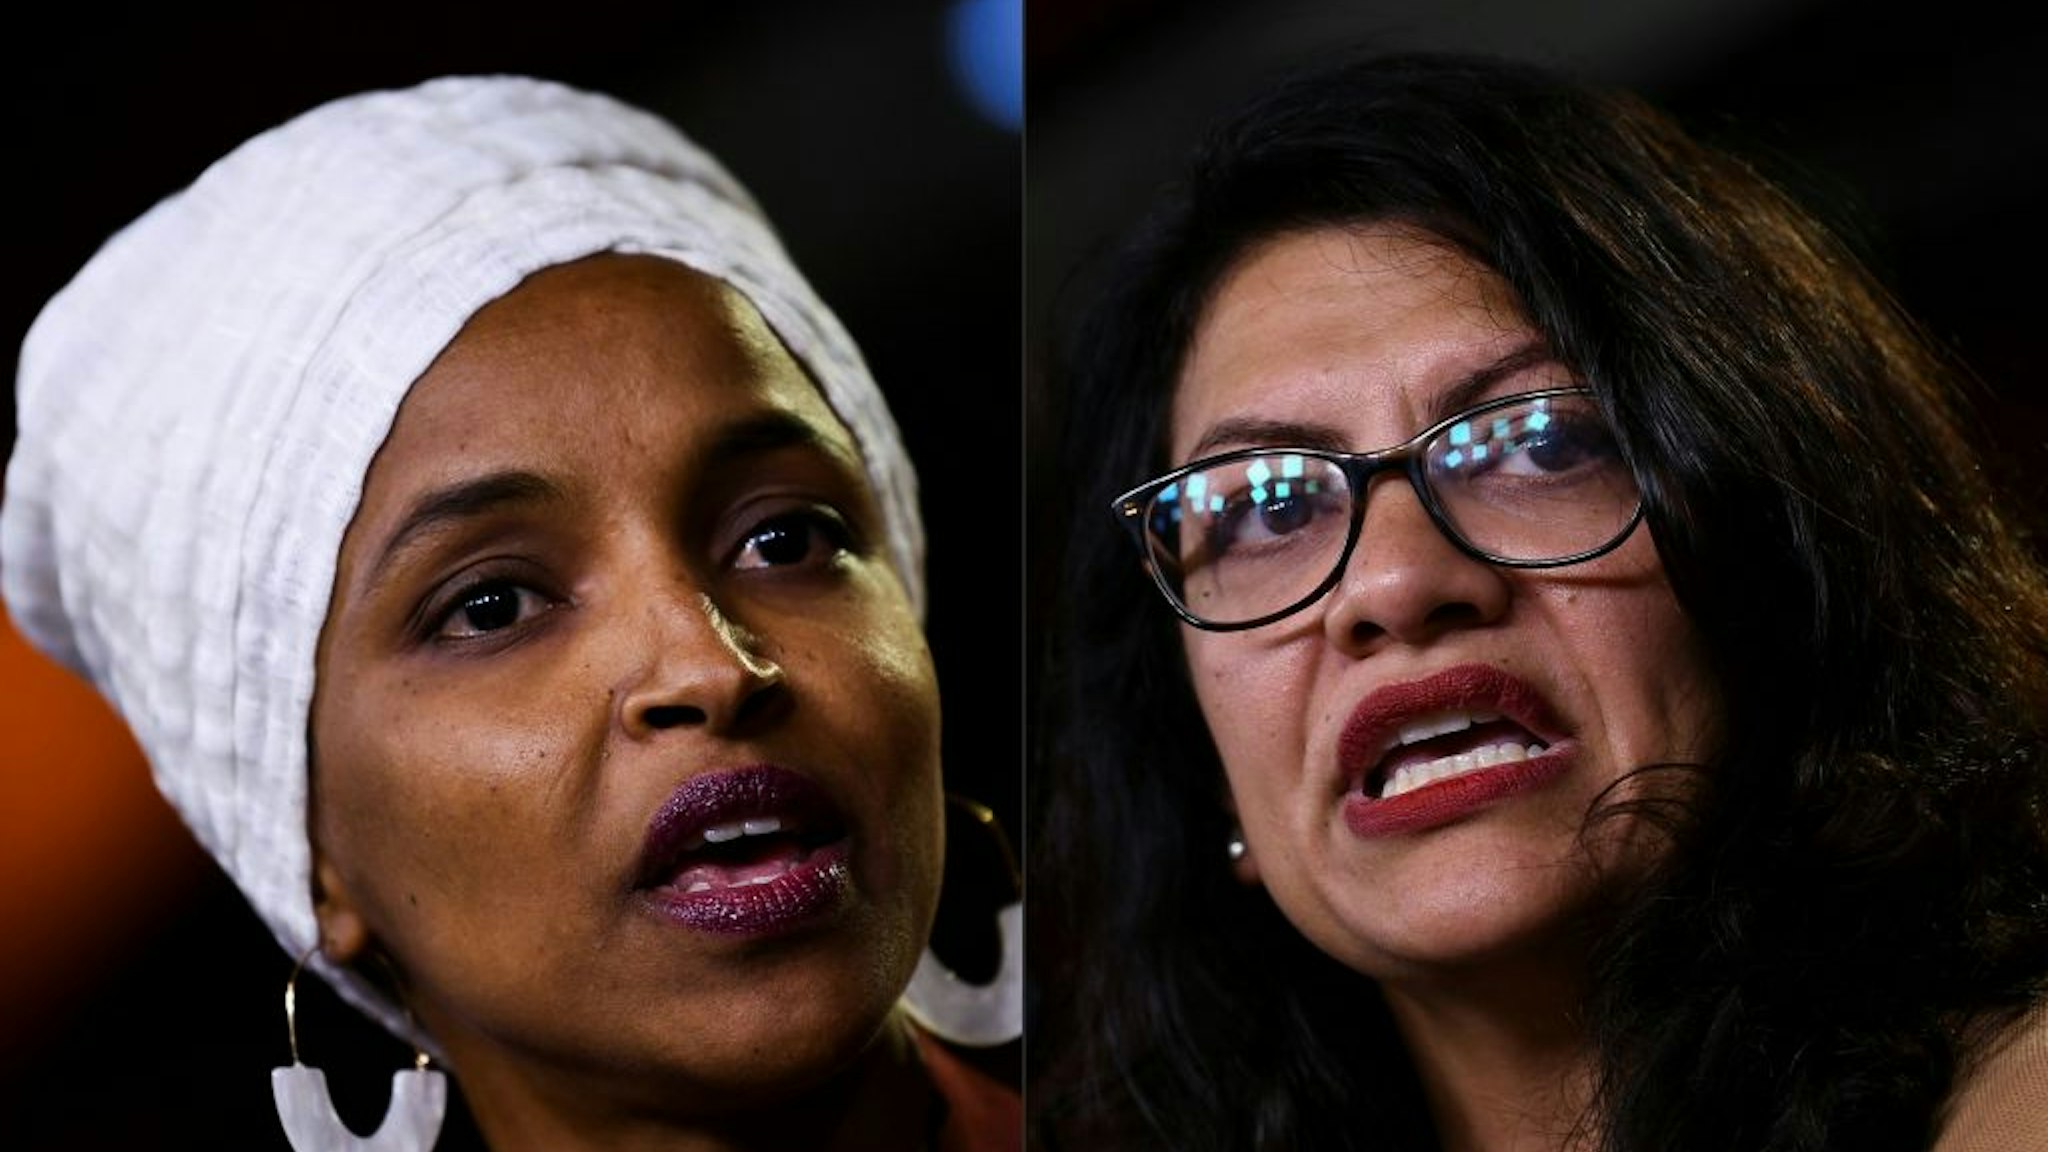 (COMBO) This combination of pictures created on August 15, 2019 shows Democrat US Representatives Ilhan Abdullahi Omar (L) and Rashida Tlaib during a press conference, to address remarks made by US President Donald Trump earlier in the day, at the US Capitol in Washington, DC on July 15, 2019. - Influential US pro-Israel lobby AIPAC on August 15, 2019 opposed Prime Minister Benjamin Netanyahu's decision to bar two Muslim American members of Congress from visiting the Jewish state."We disagree with Reps. Omar and Tlaib's support for the anti-Israel and anti-peace BDS movement, along with Rep. Tlaib's calls for a one-state solution," the American Israel Public Affairs Committee tweeted, referring to House Democrats Ilhan Omar and Rashida Tlaib, who support a boycott of Israel.